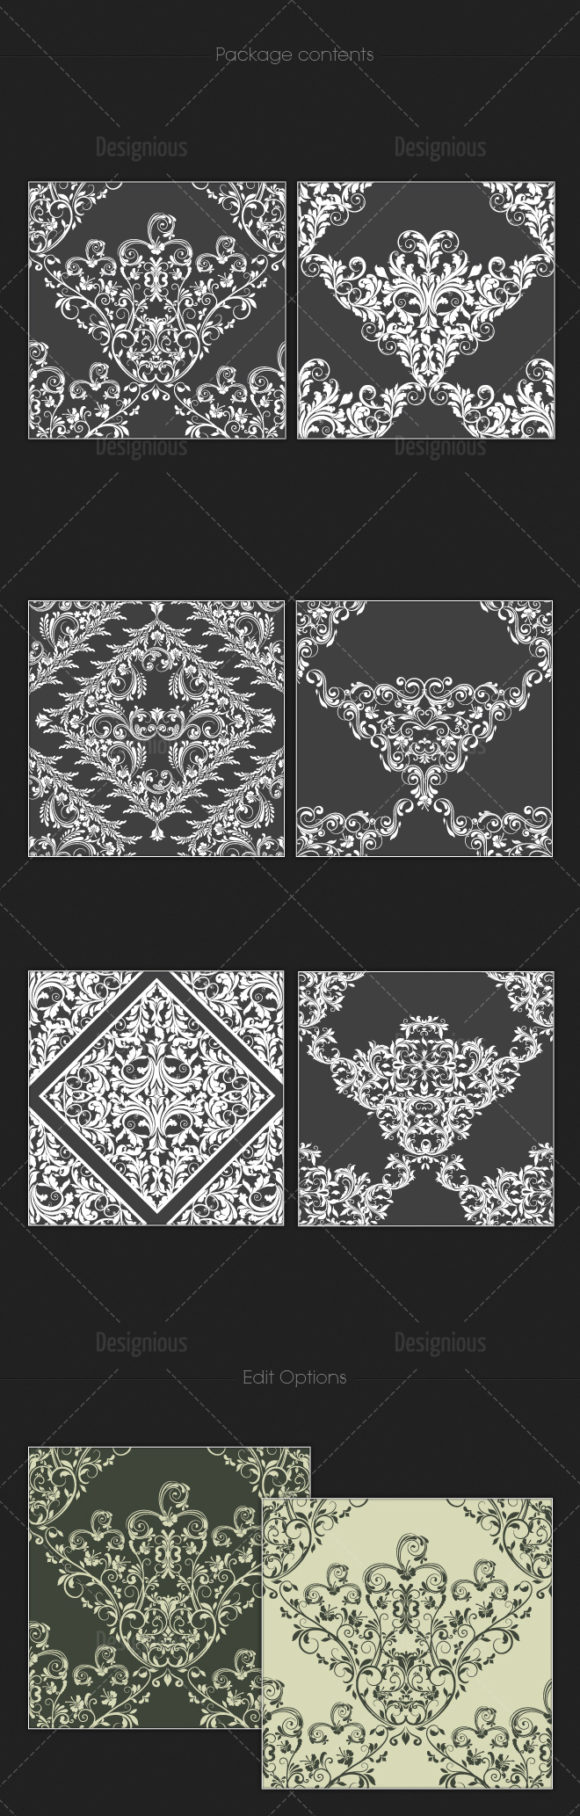 Seamless Patterns Vector Pack 104 2